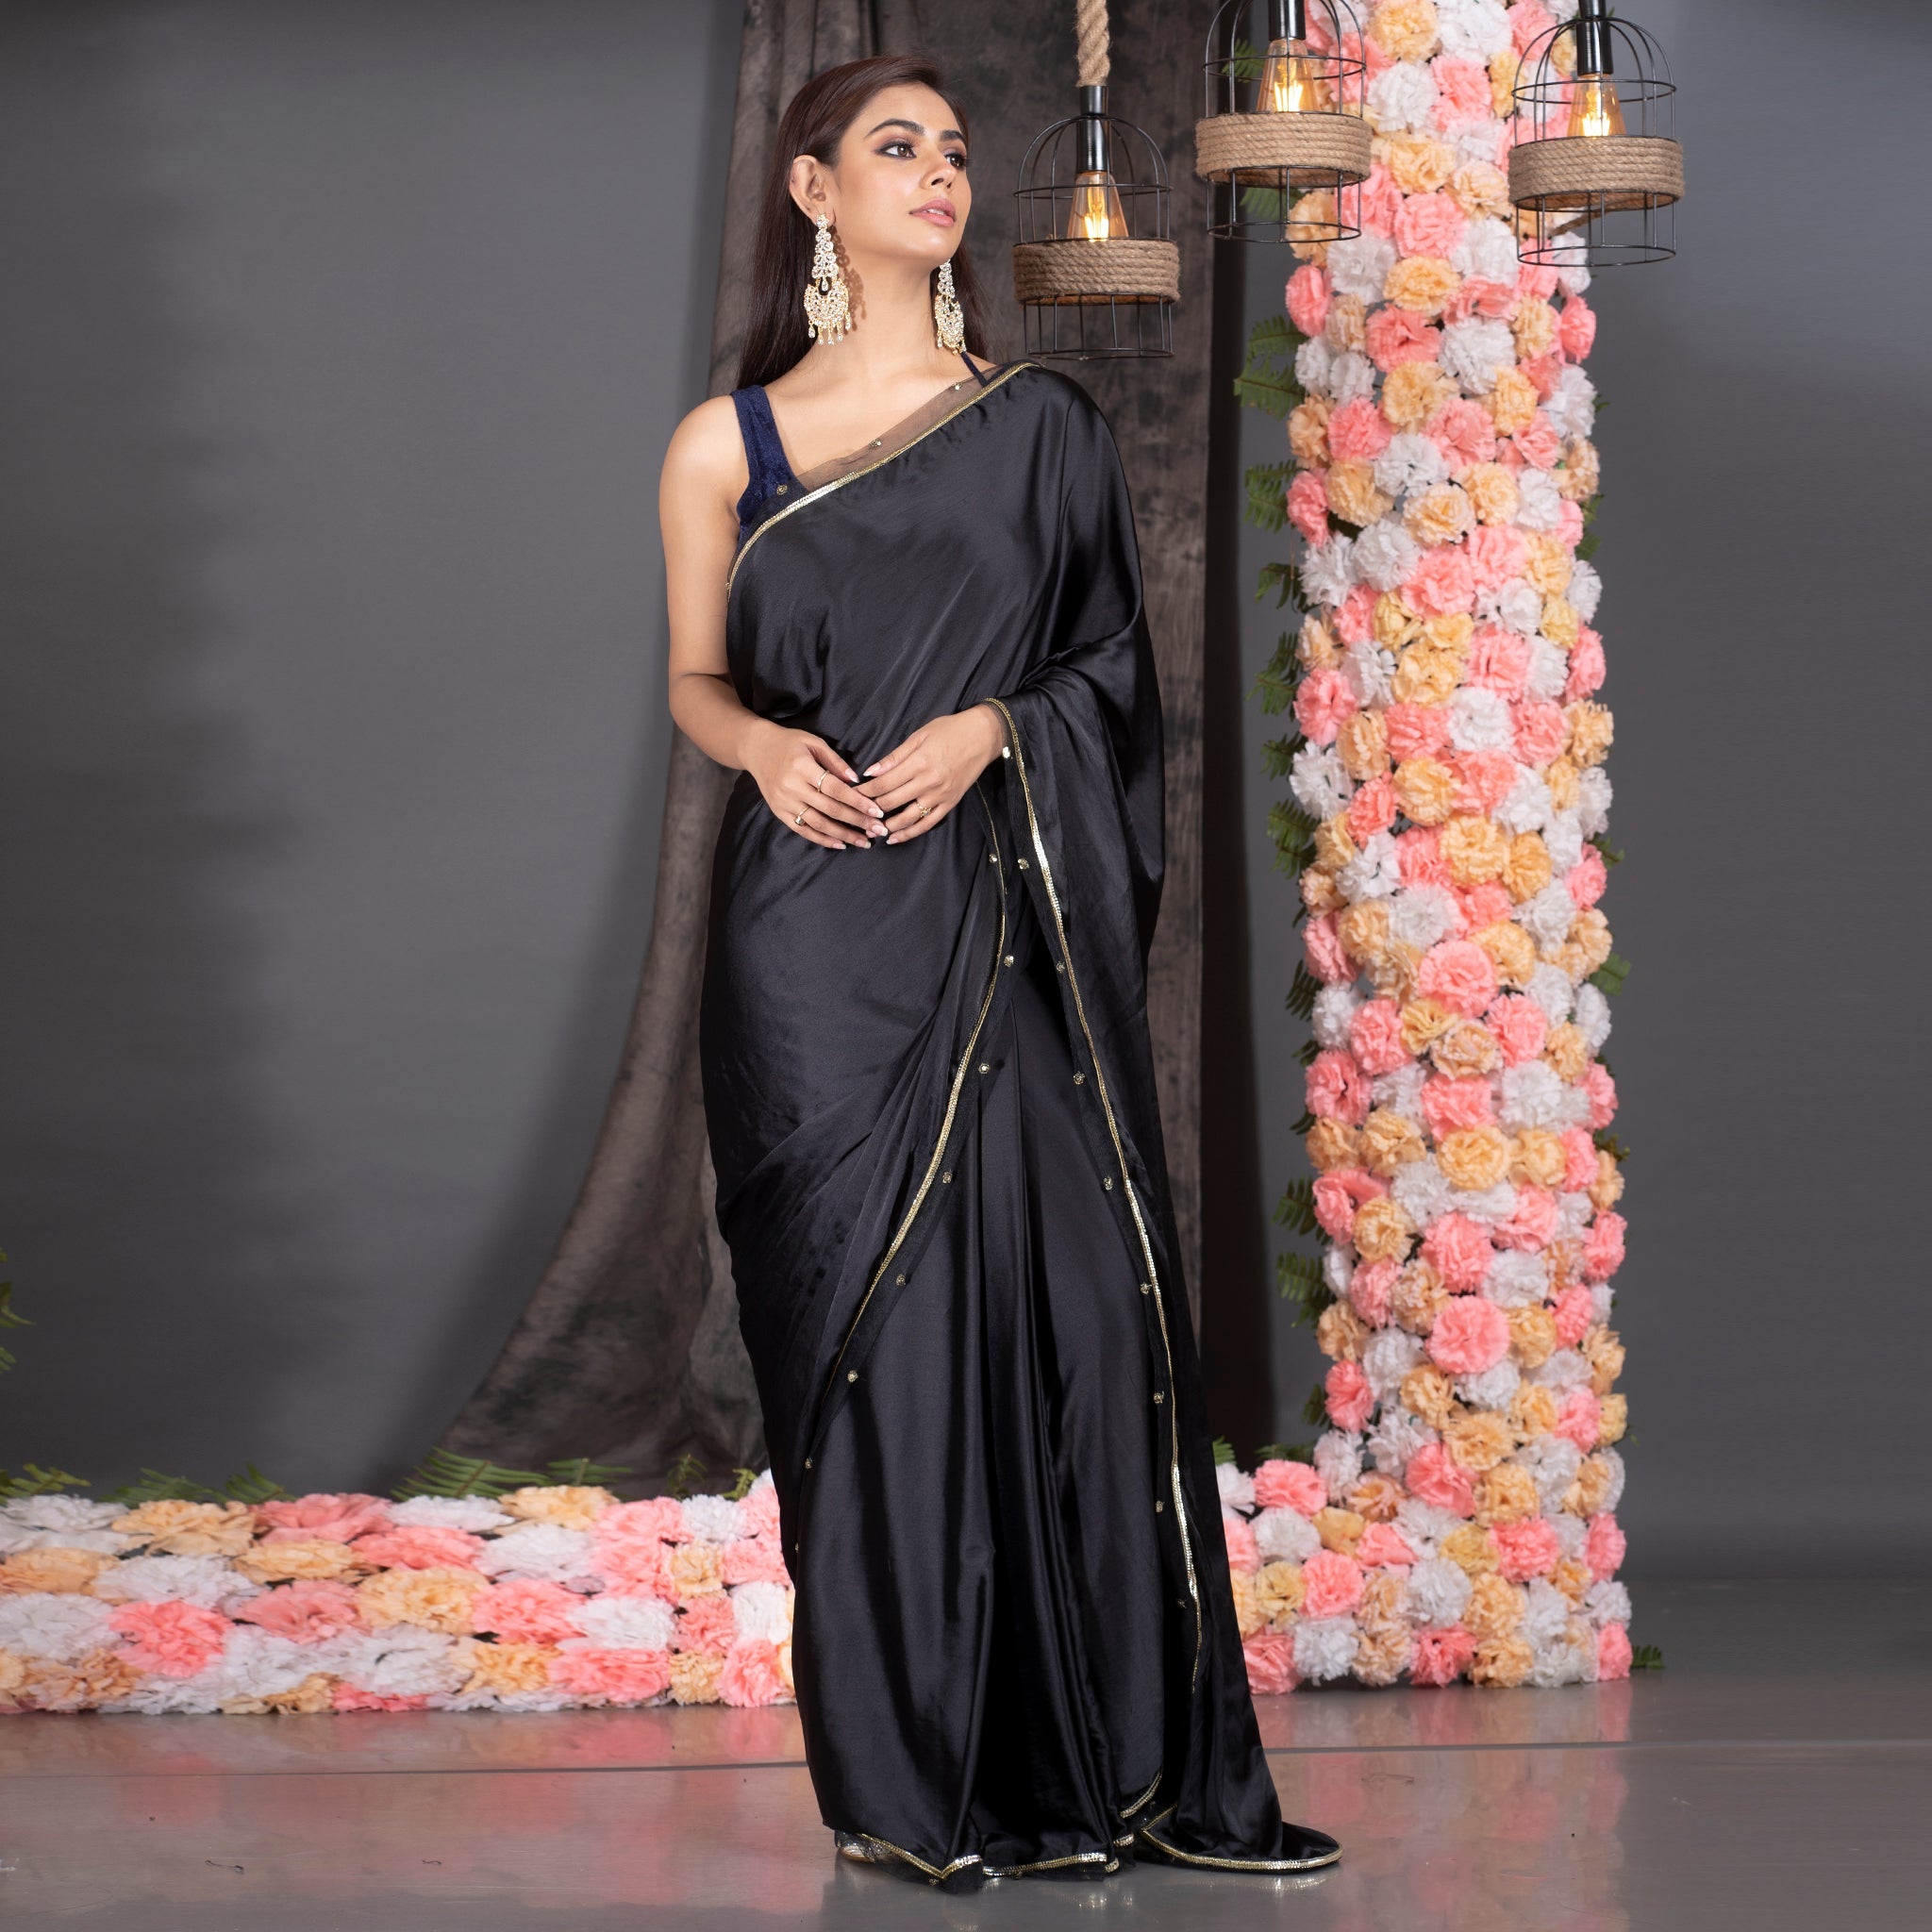 Women's Black Satin Saree With Embroidered Border - Boveee